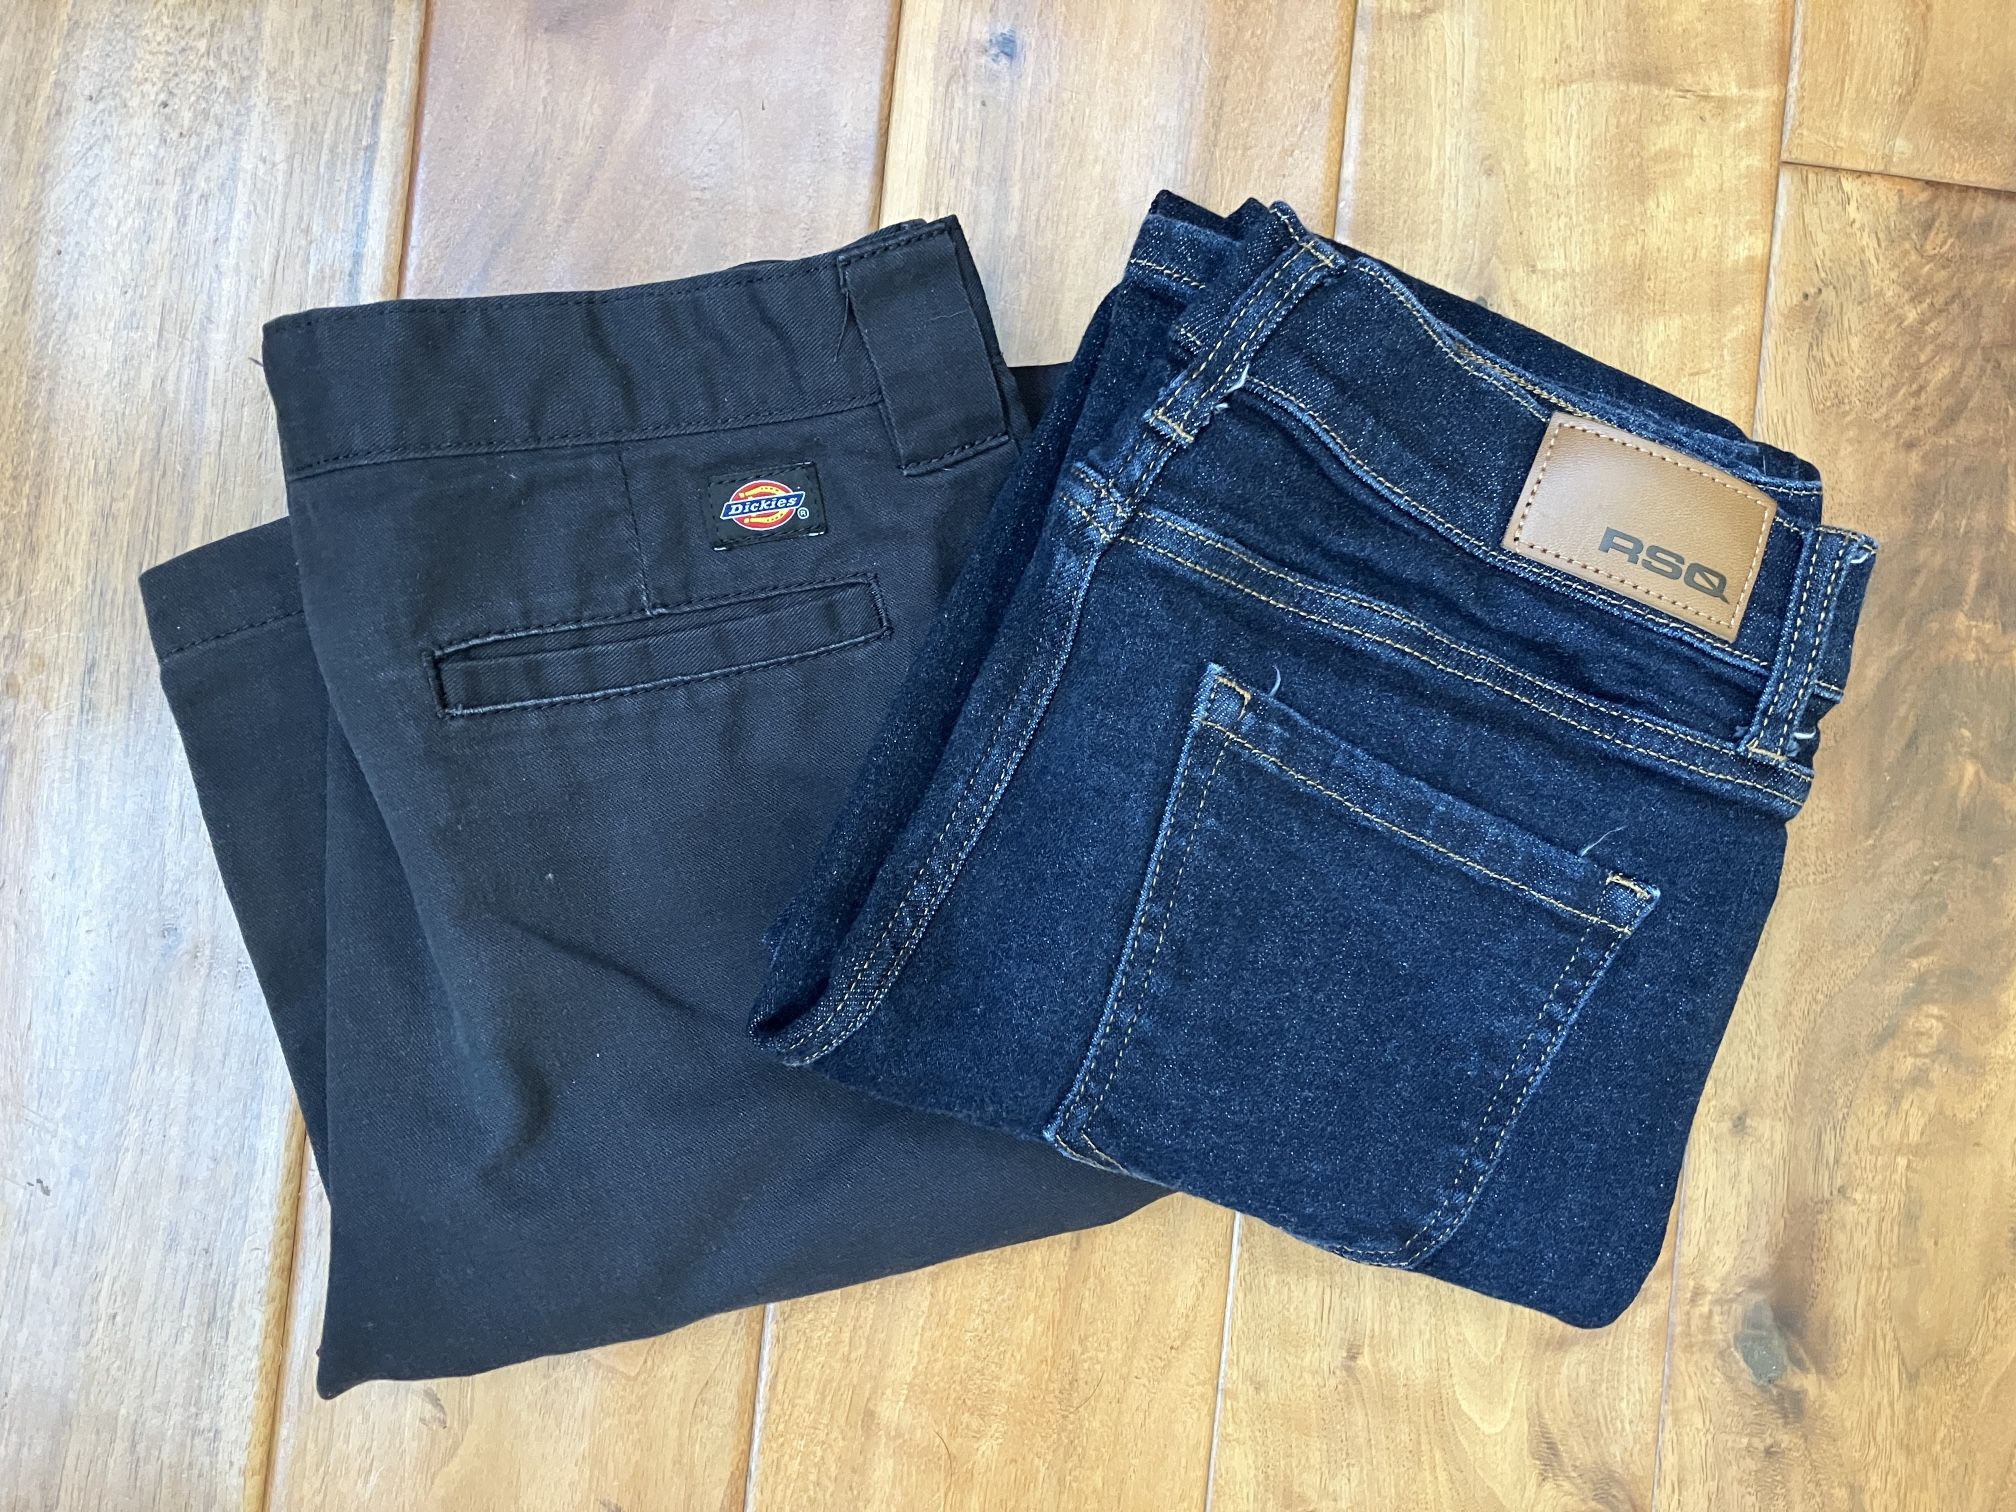 Dickies & RSQ Size 14 Boys Pants Excellent Condition